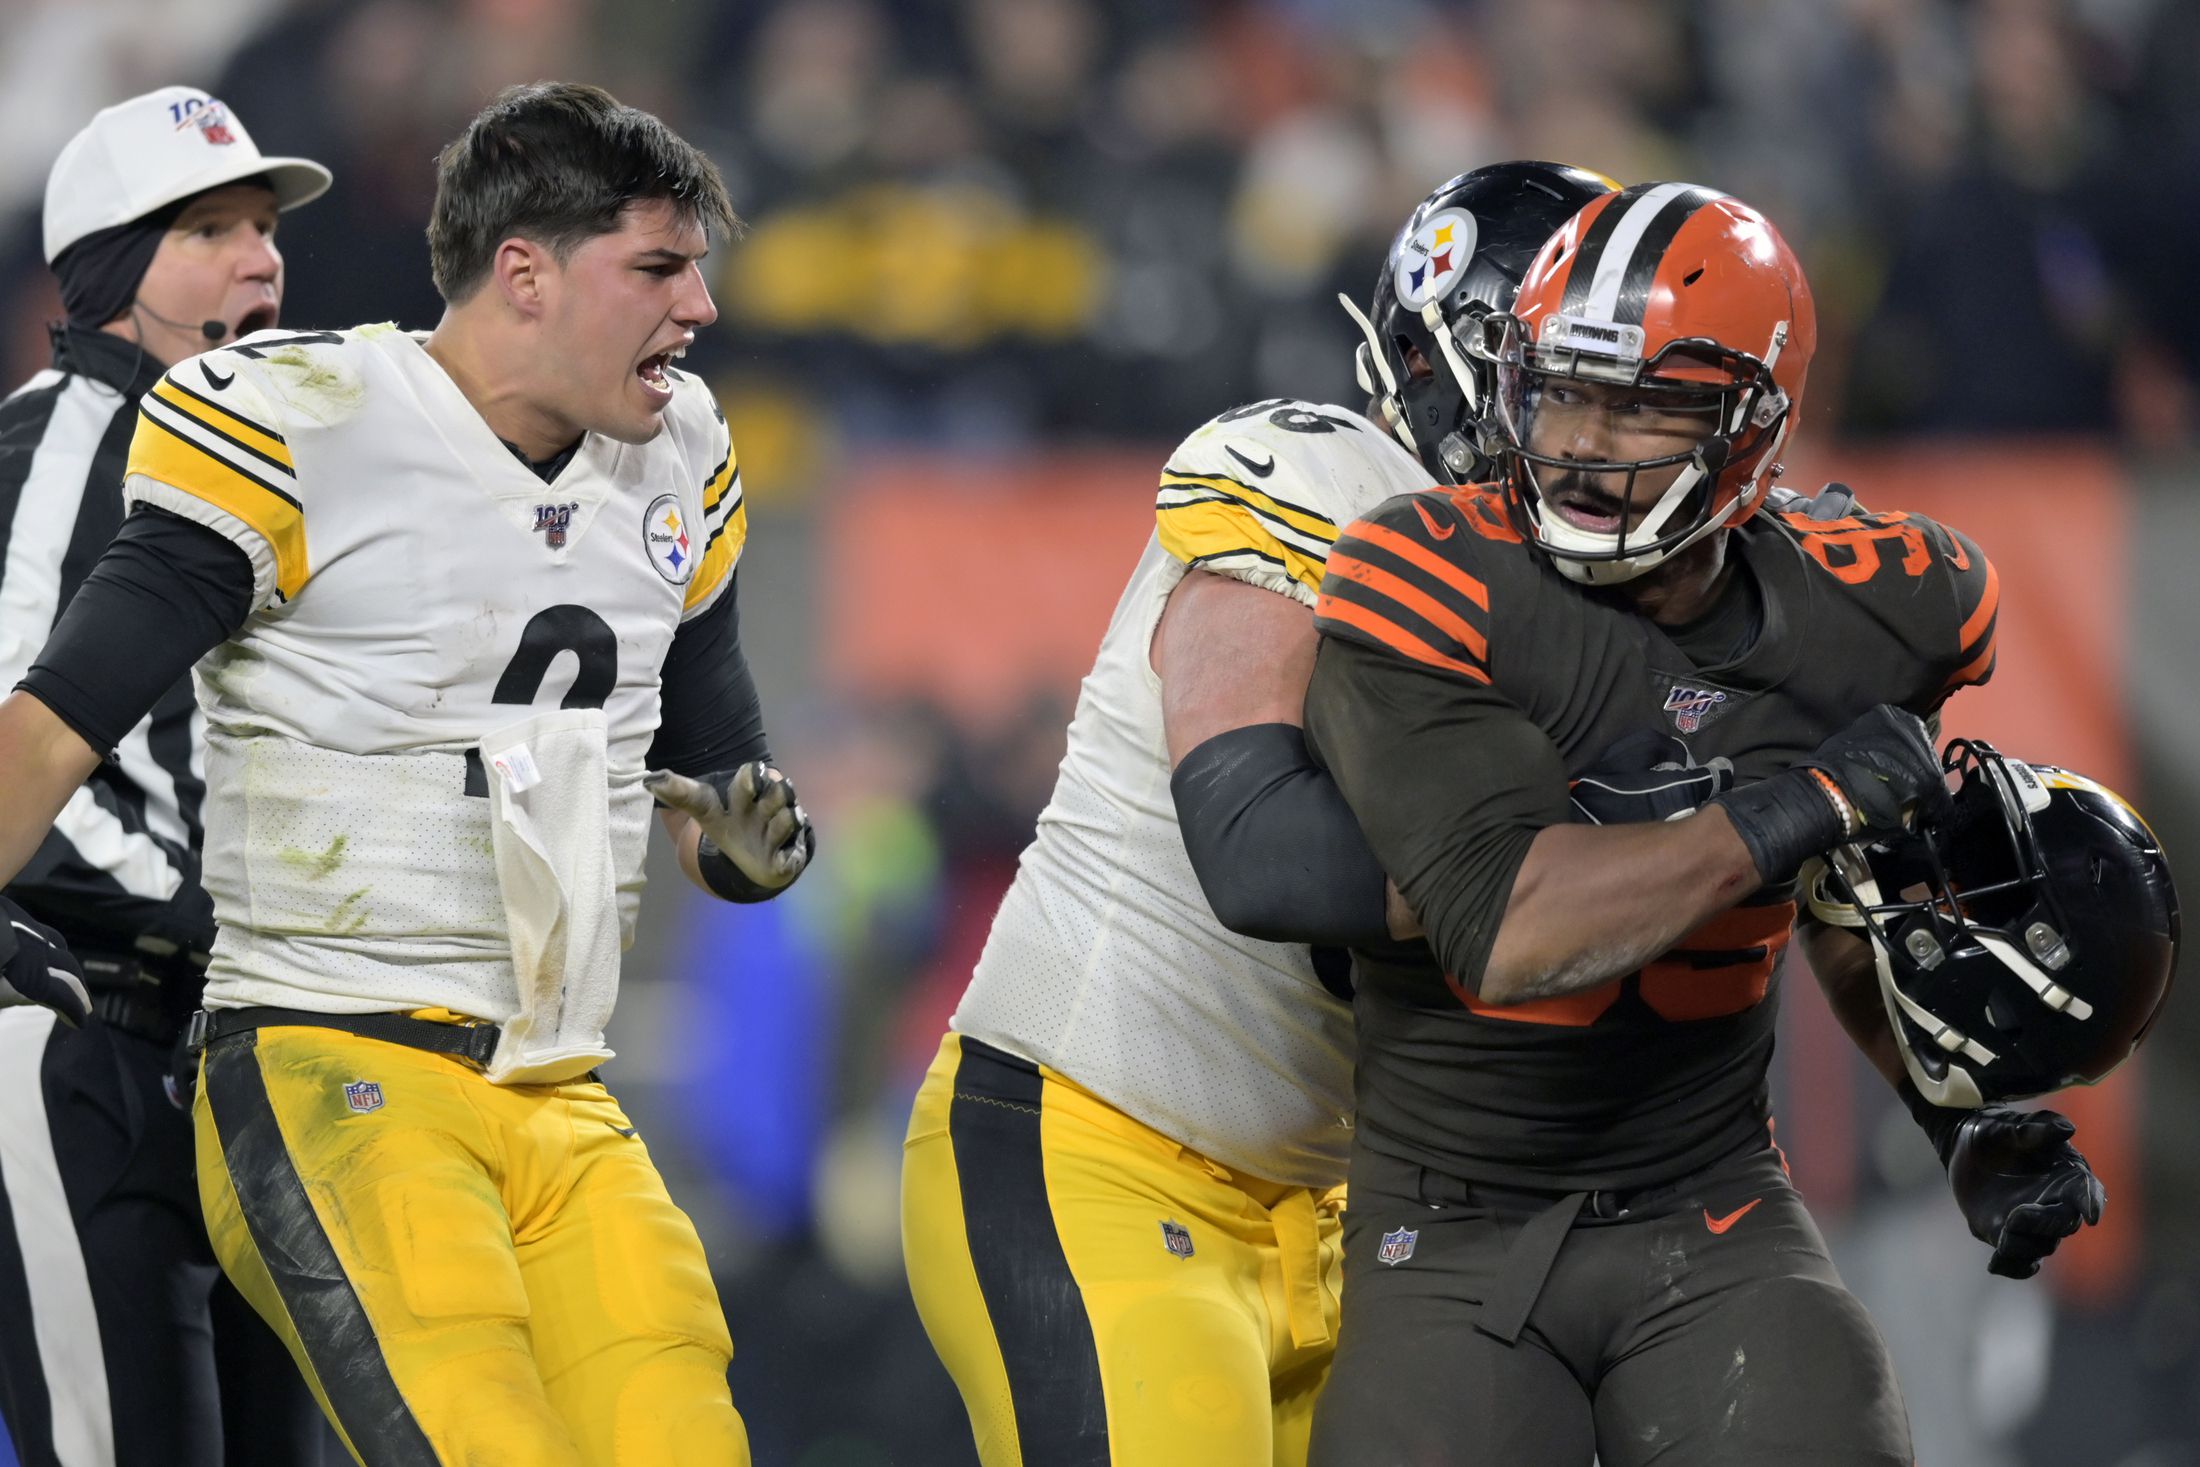 Mason Rudolph and Myles Garrett Appear to Have Made Peace